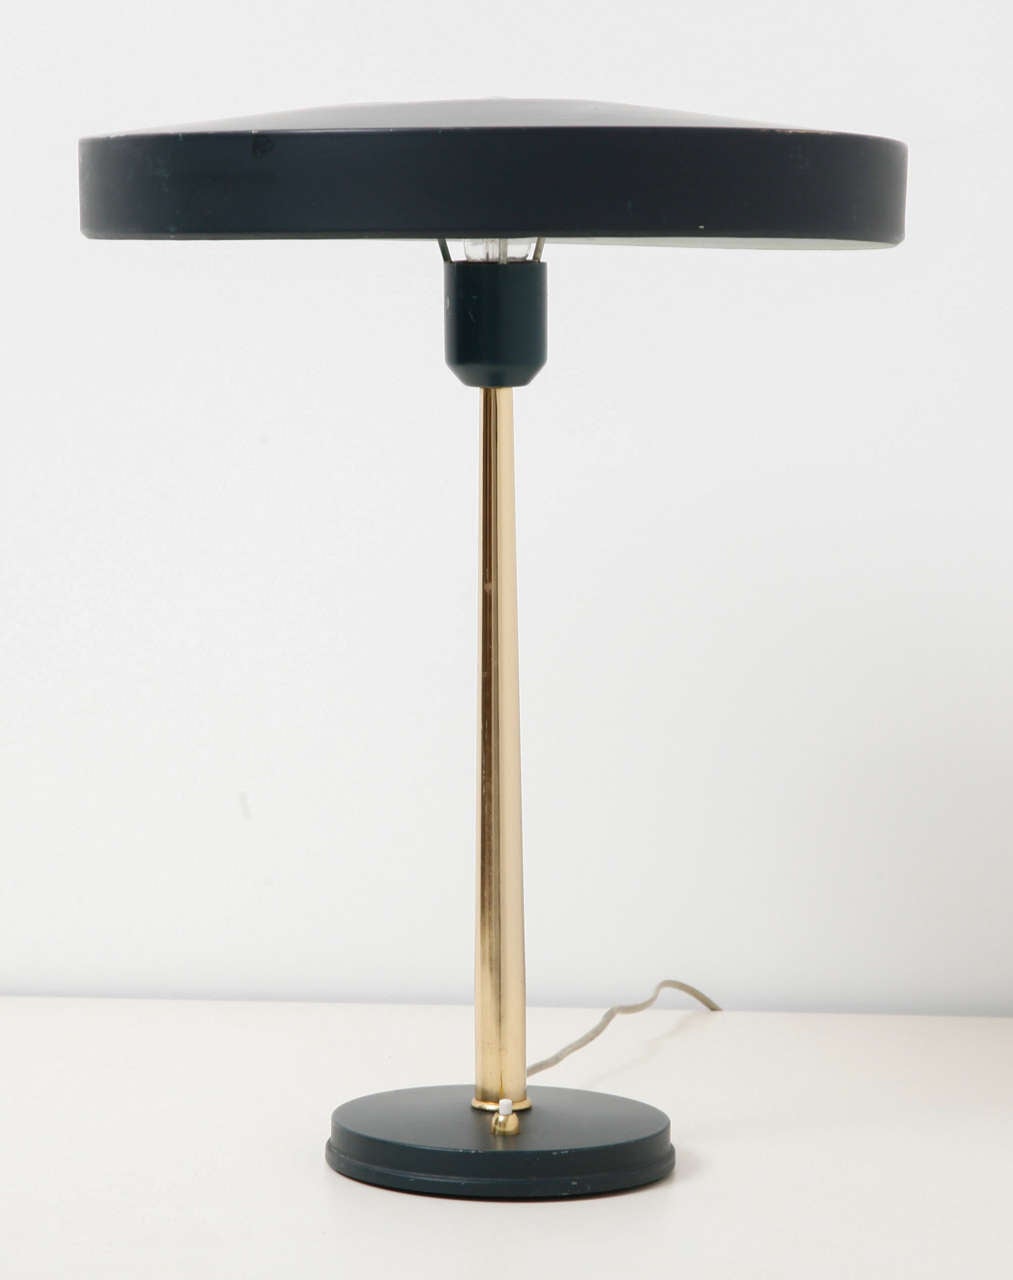 Midcentury original pair table/desk lamps in black, designed by Louis Kalff for Philips the Netherlands. 
This famous ‘Timor 69’ Dutch design features a black foot and a UFO-shaped aluminum lampshade on a gilt stem. 
The lamp foot is labeled by